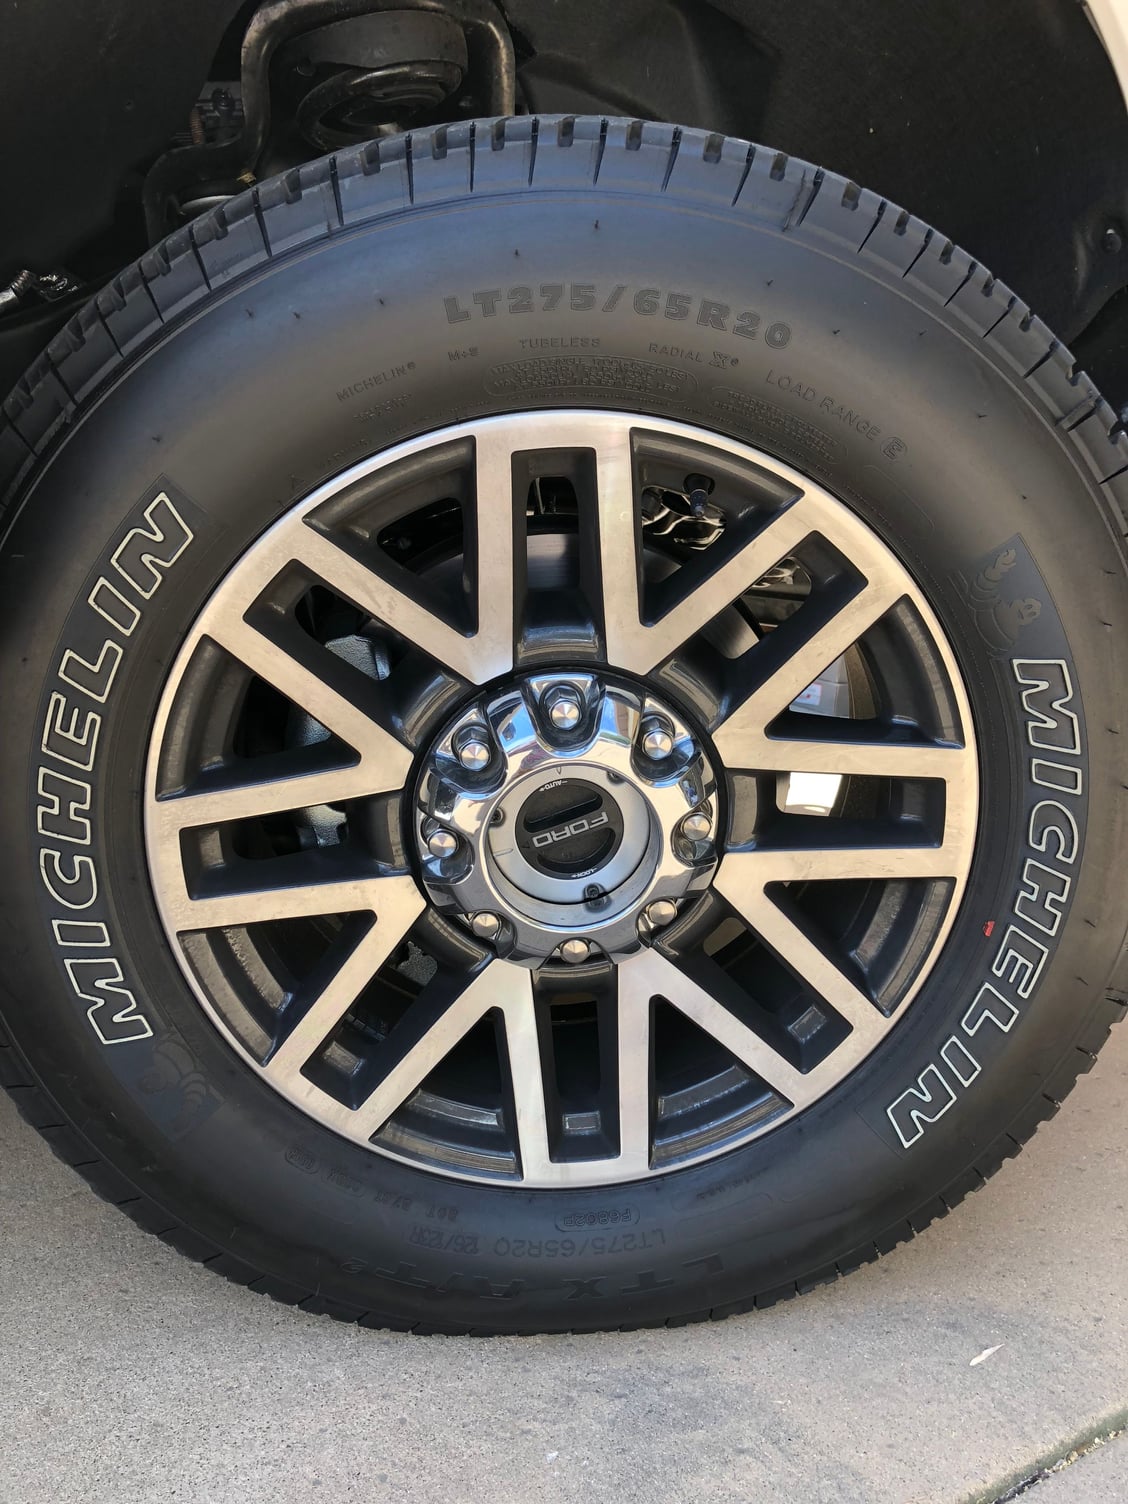 Wheels and Tires/Axles - 2017 2018 Super Duty Lariat 20" wheels and Michelin tires - Used - 2005 to 2019 Ford All Models - Sacramento, CA 95825, United States